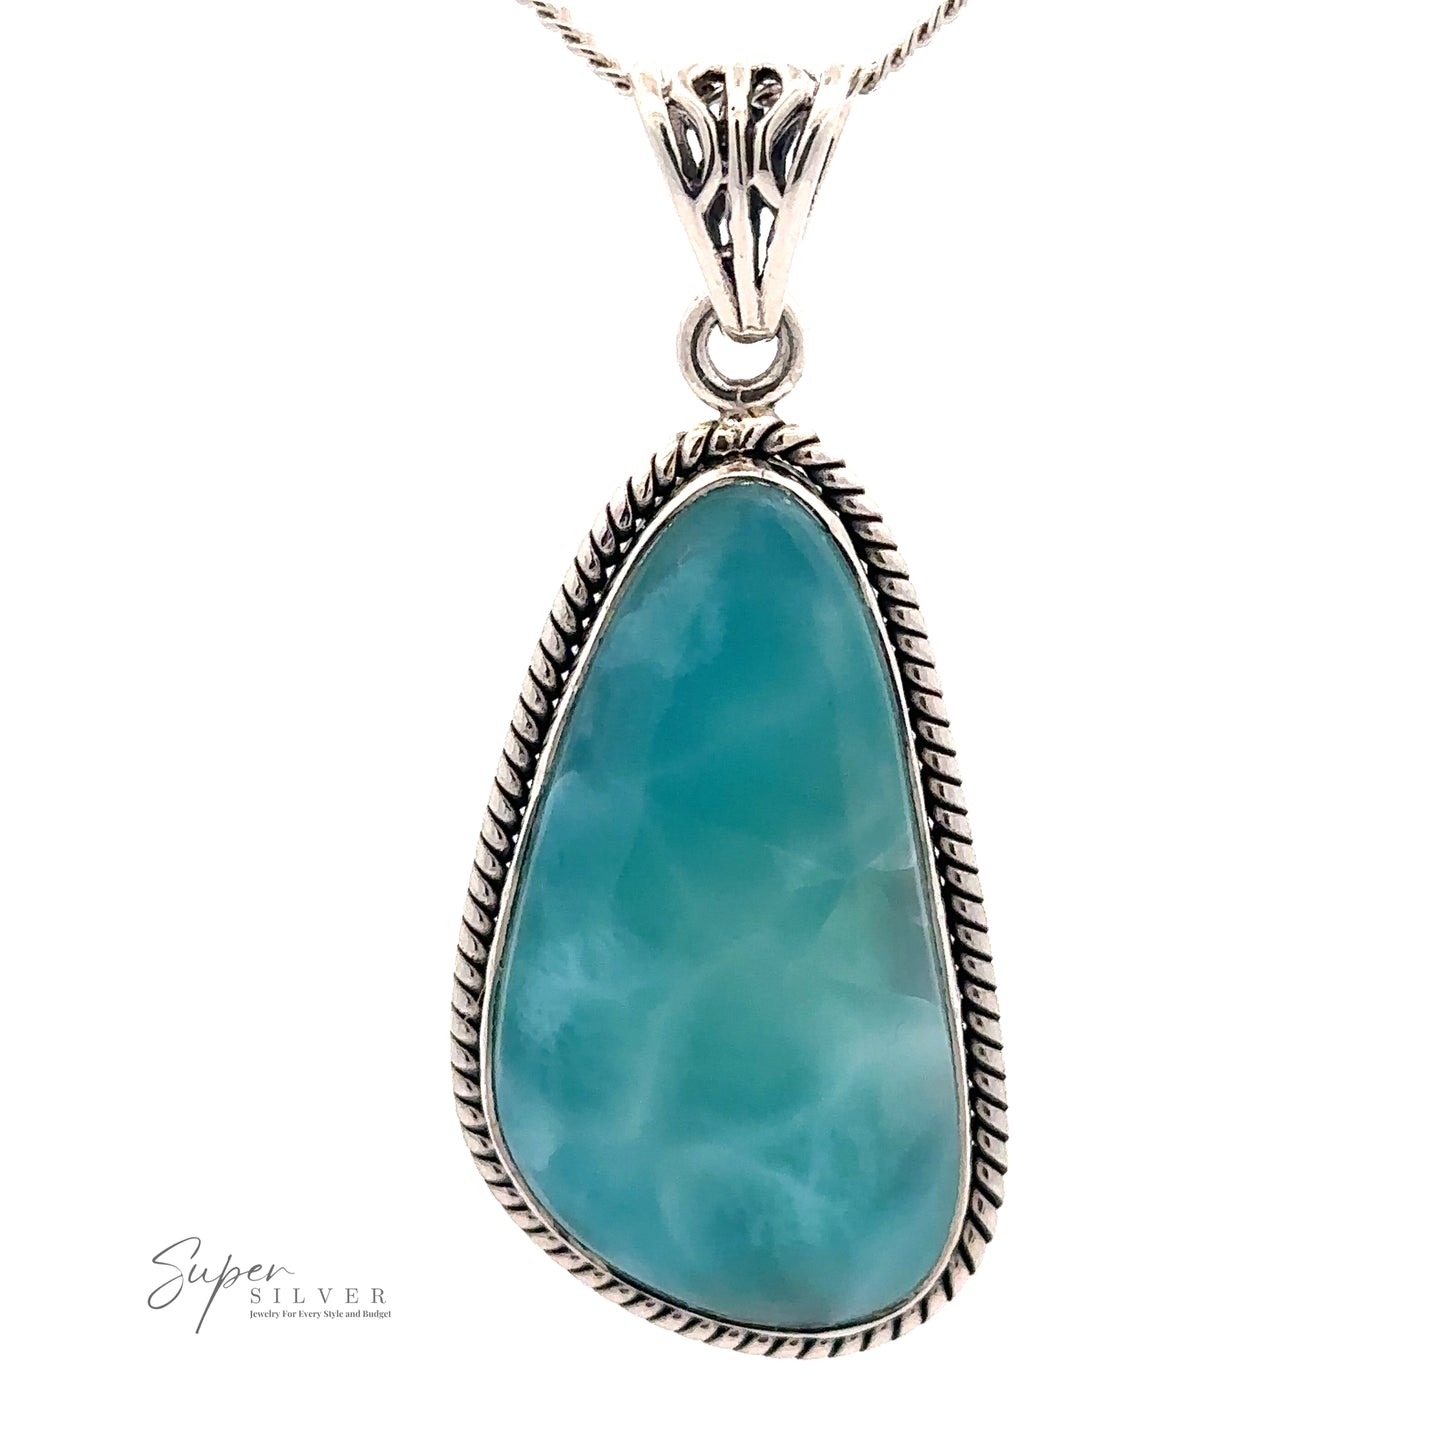 
                  
                    A striking Larimar Pendant with Rope Border featuring a teardrop-shaped blue stone set in a detailed Sterling Silver frame, hanging from a silver chain. The “Super Silver” logo is visible in the bottom left corner.
                  
                